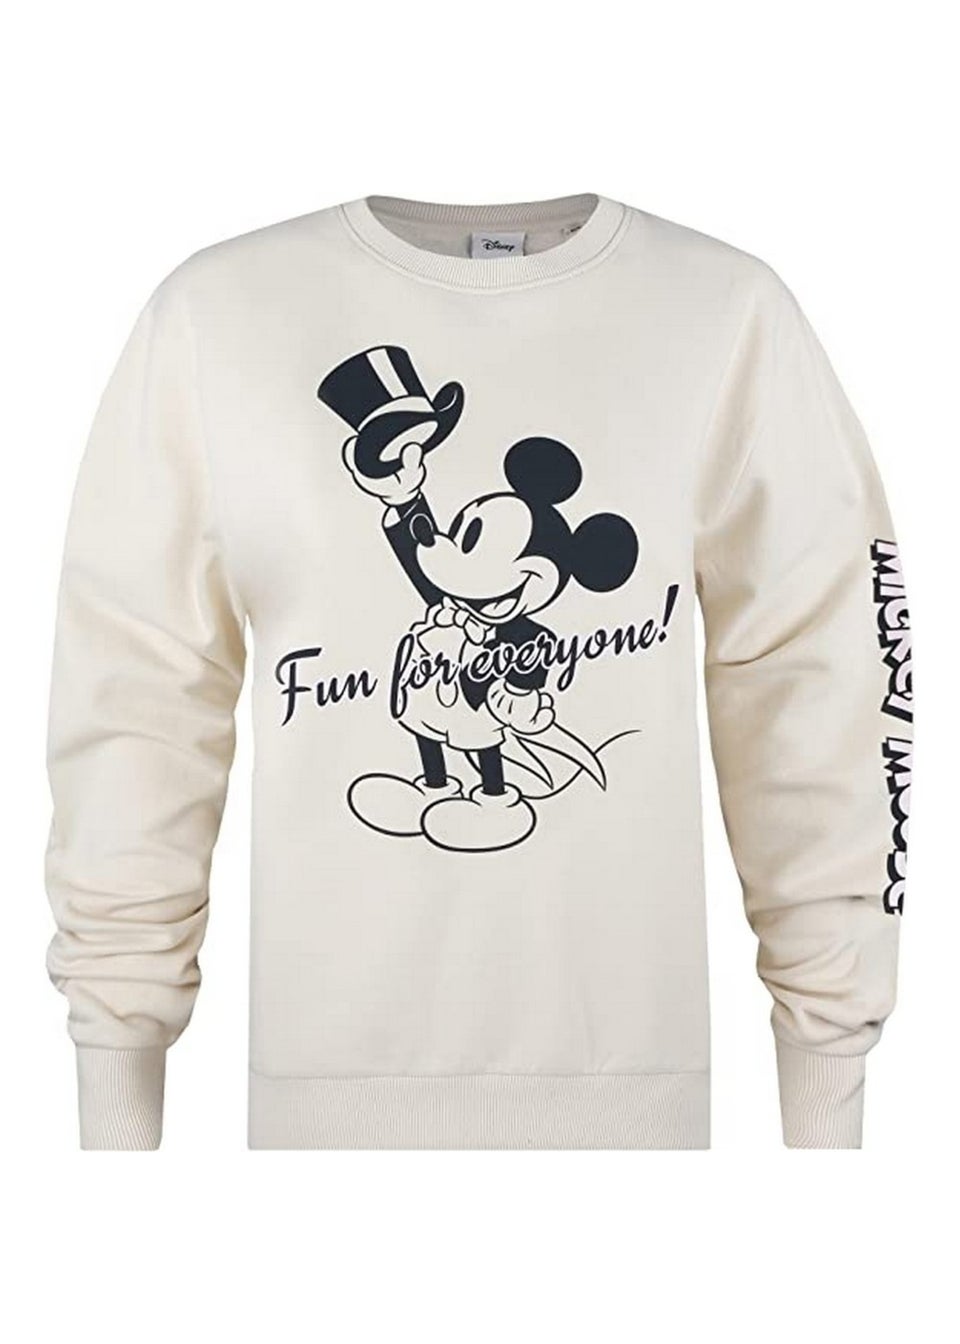 Disney Navy/Gold Showtime Fun For Everyone Mickey Mouse Sweatshirt